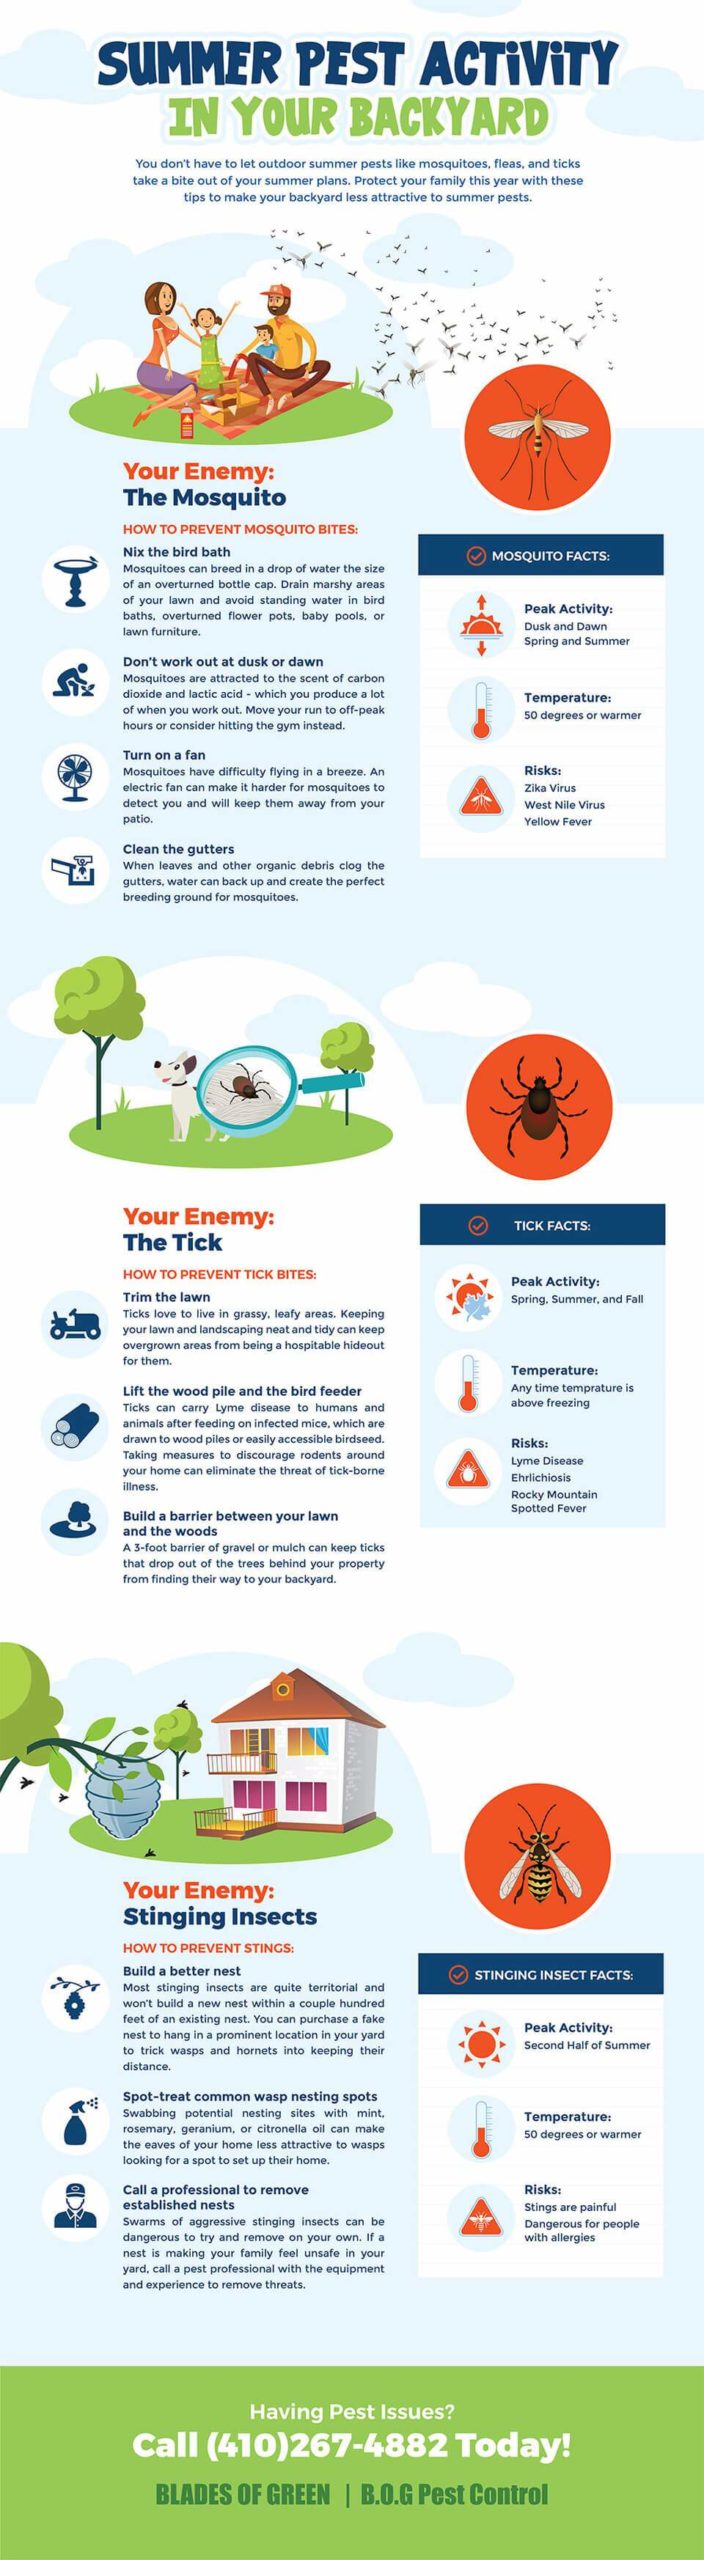 Summer-Pest-Activity-in-Your-Backyard